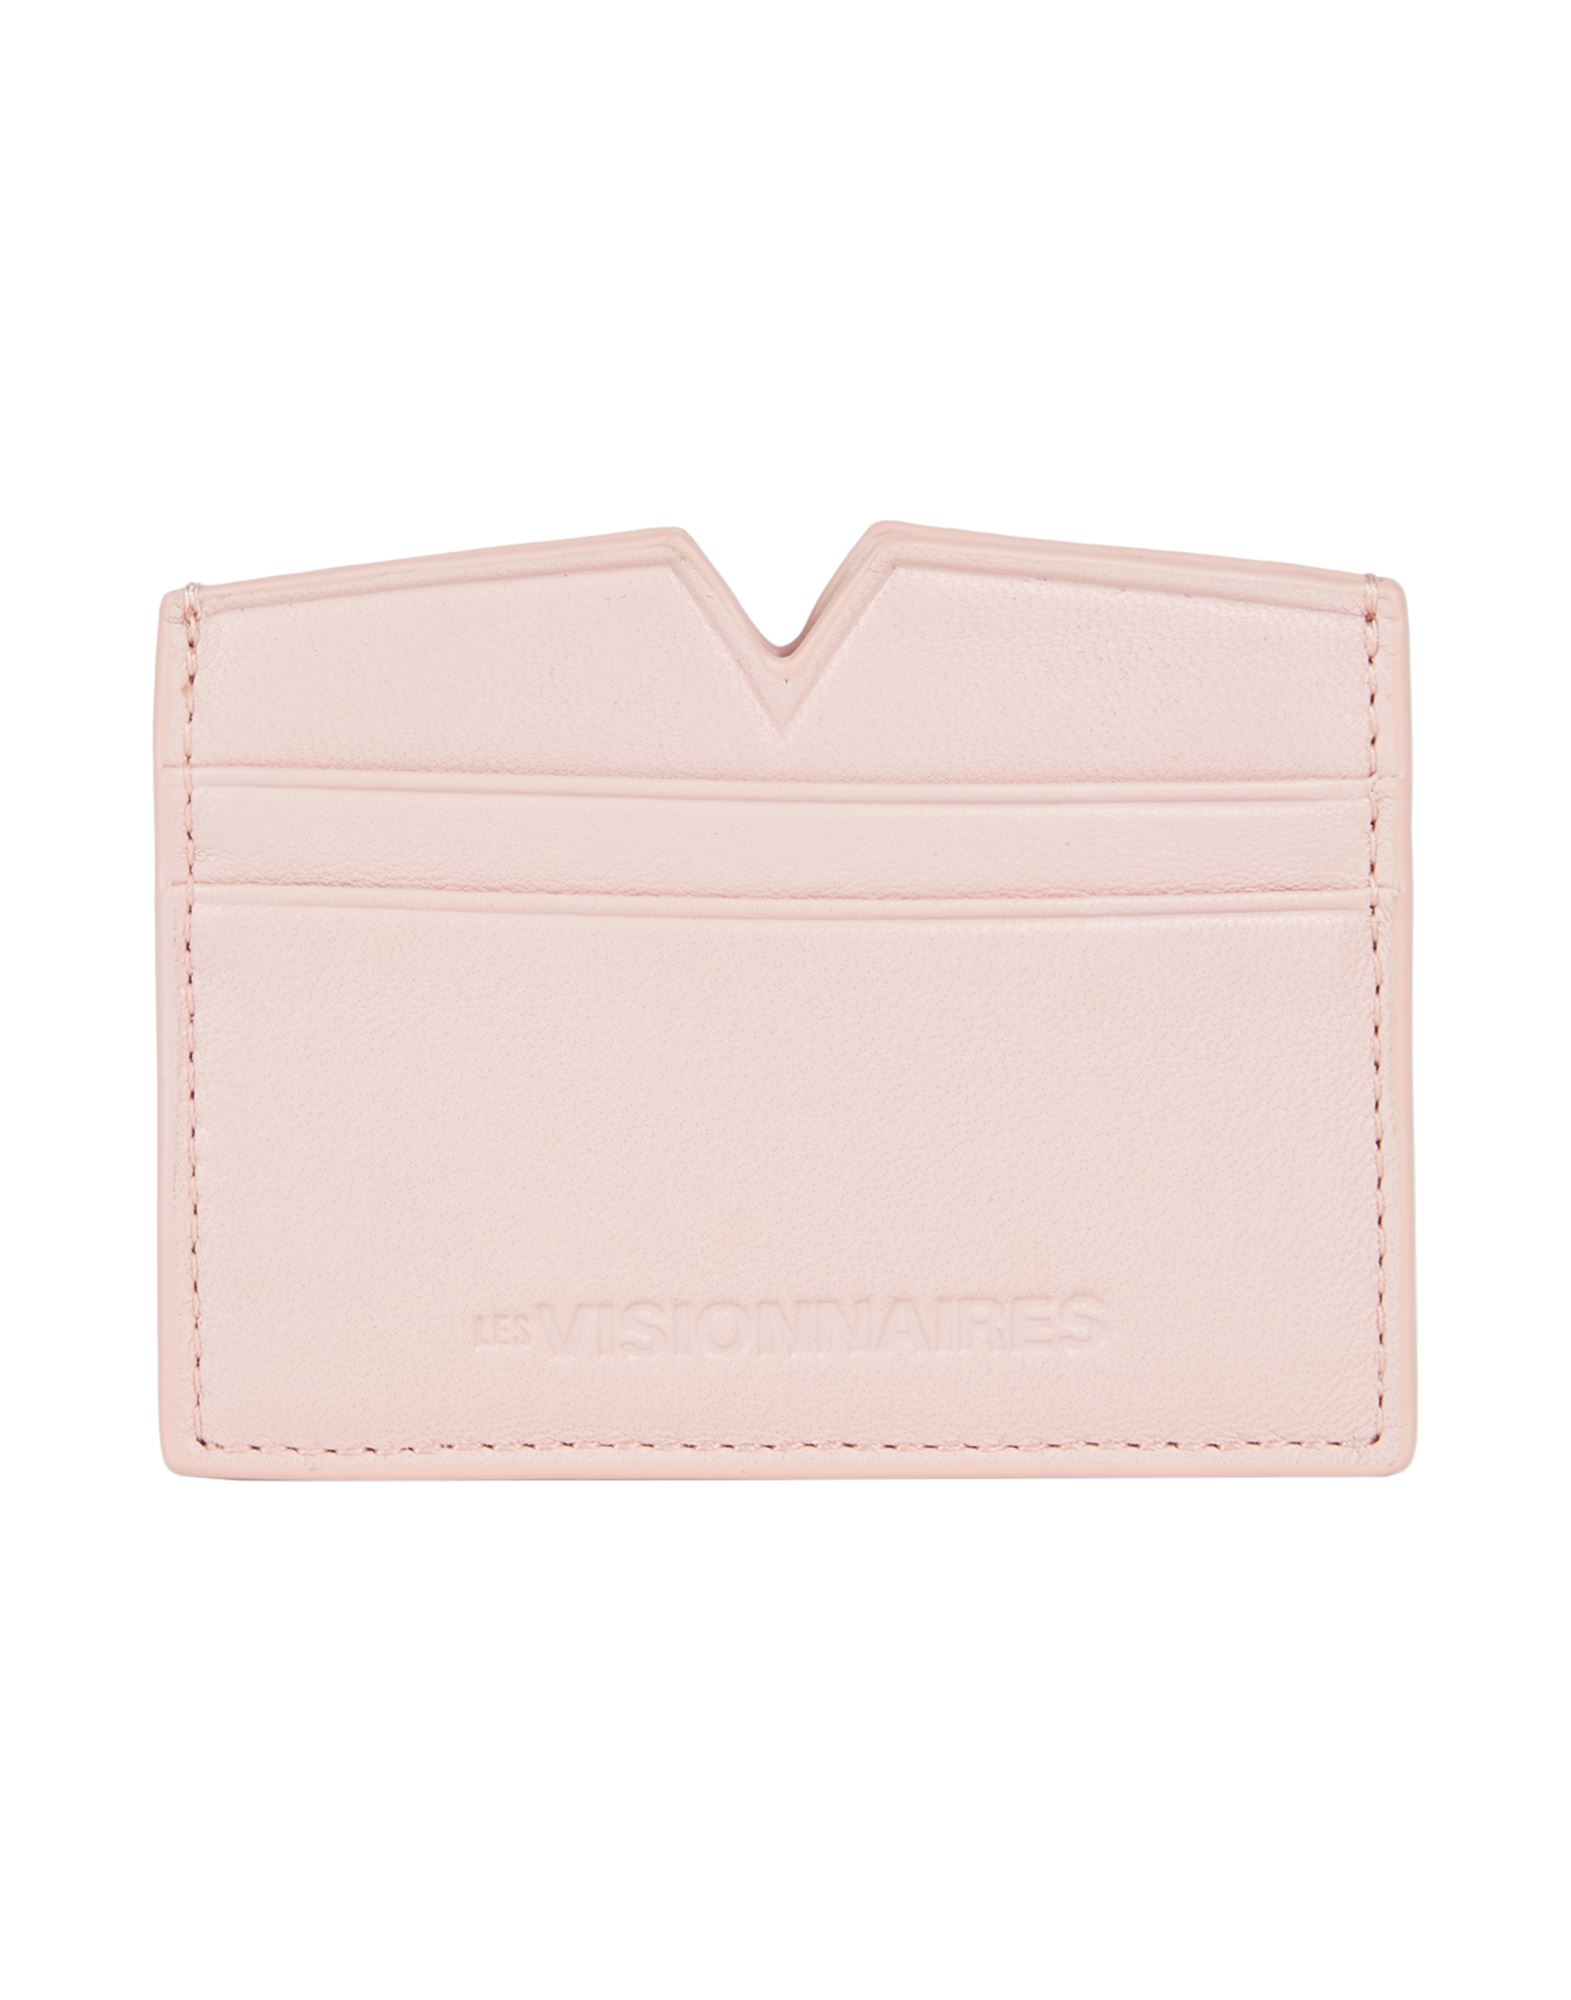 Les Visionnaires Document Holders In Pink